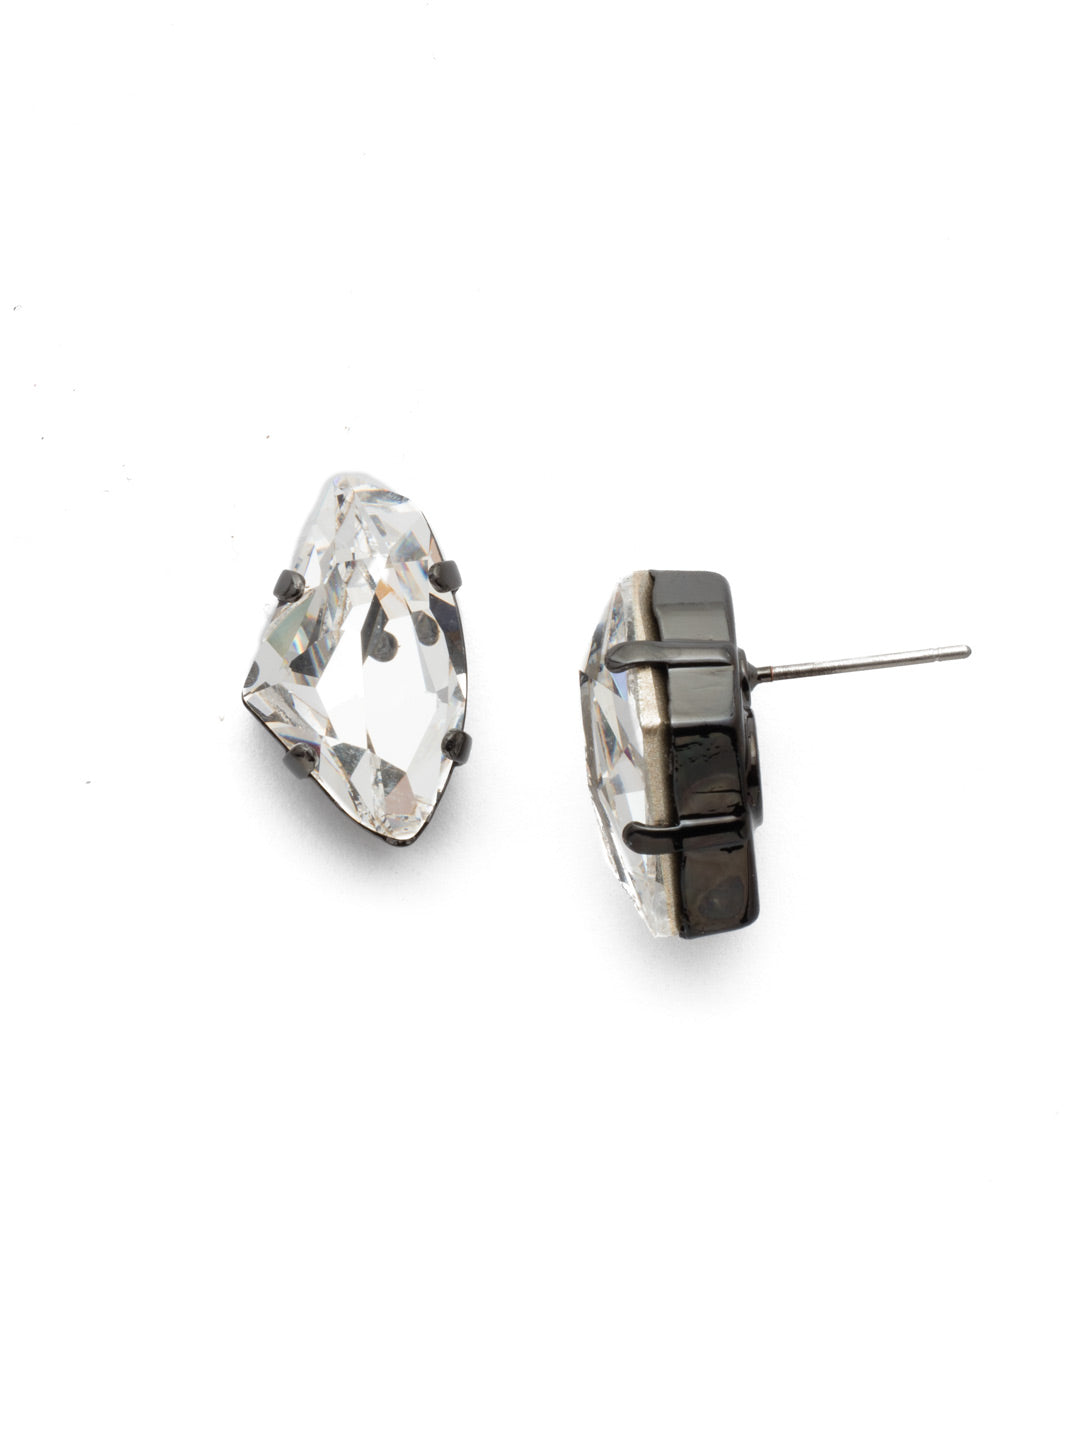 Sabina Stud Earrings - 4EEP38GMCRY - <p>Simple and unique, the Sabina Stud Earrings are a twist on classic studs showcasing a signature crystal cut. From Sorrelli's Crystal collection in our Gun Metal finish.</p>